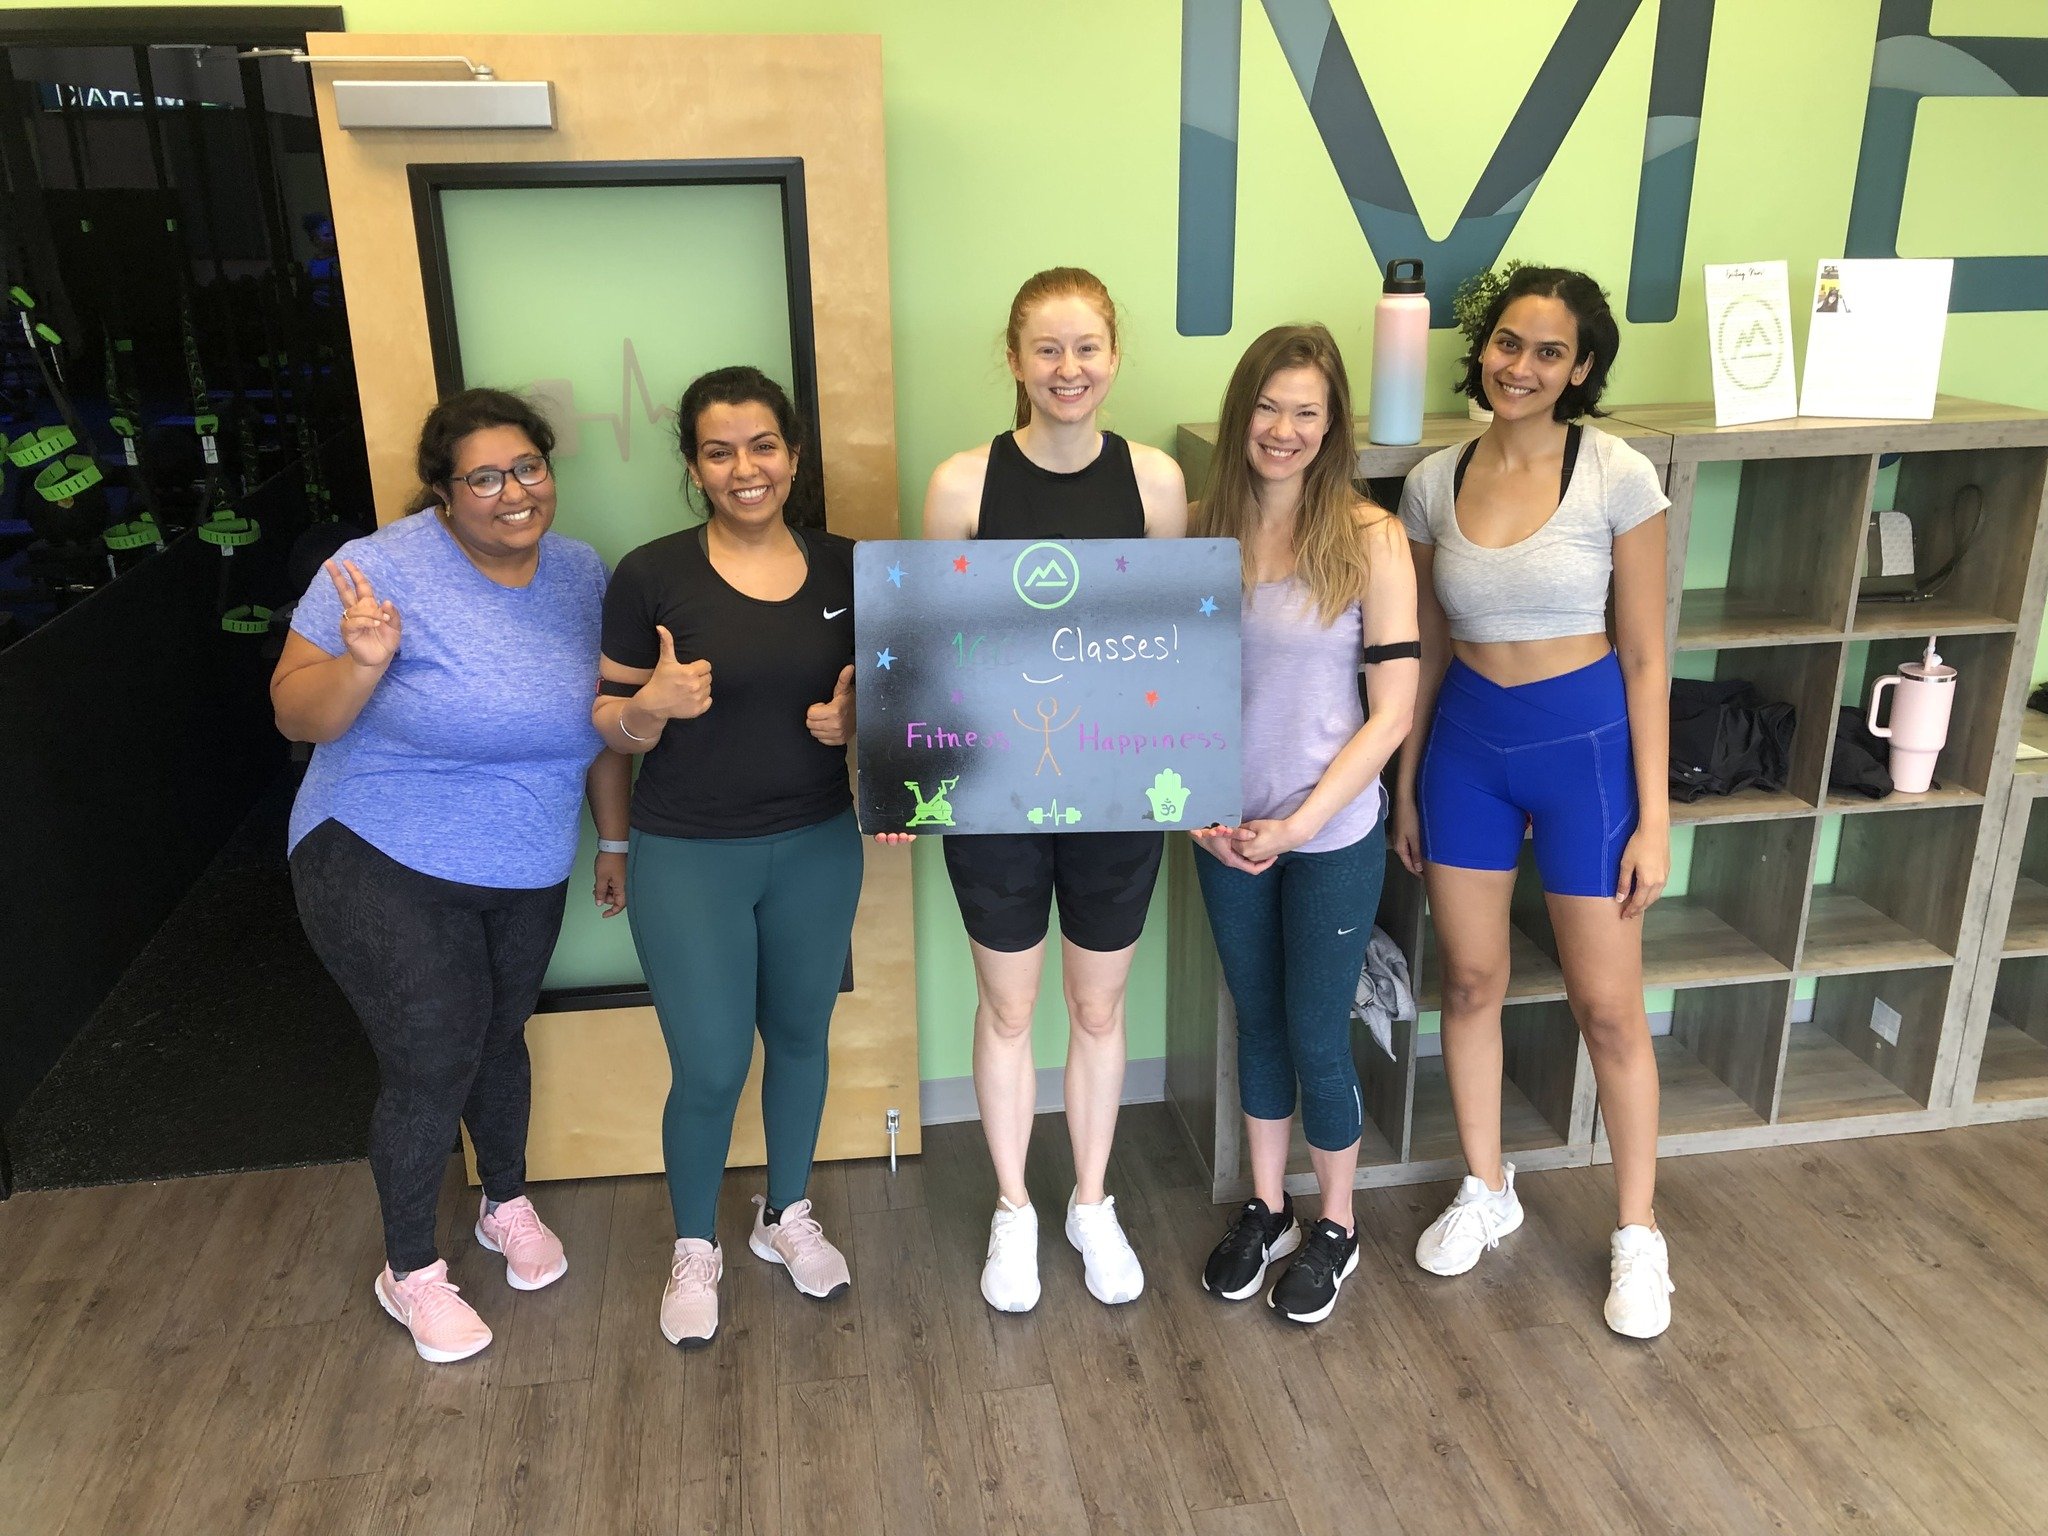 CONGRATULATIONS Marisa for completing your 100th class! What an incredible achievement! Not only have you reached a milestone in terms of numbers, but you've also undoubtedly experienced countless personal victories along the way - from breaking thro